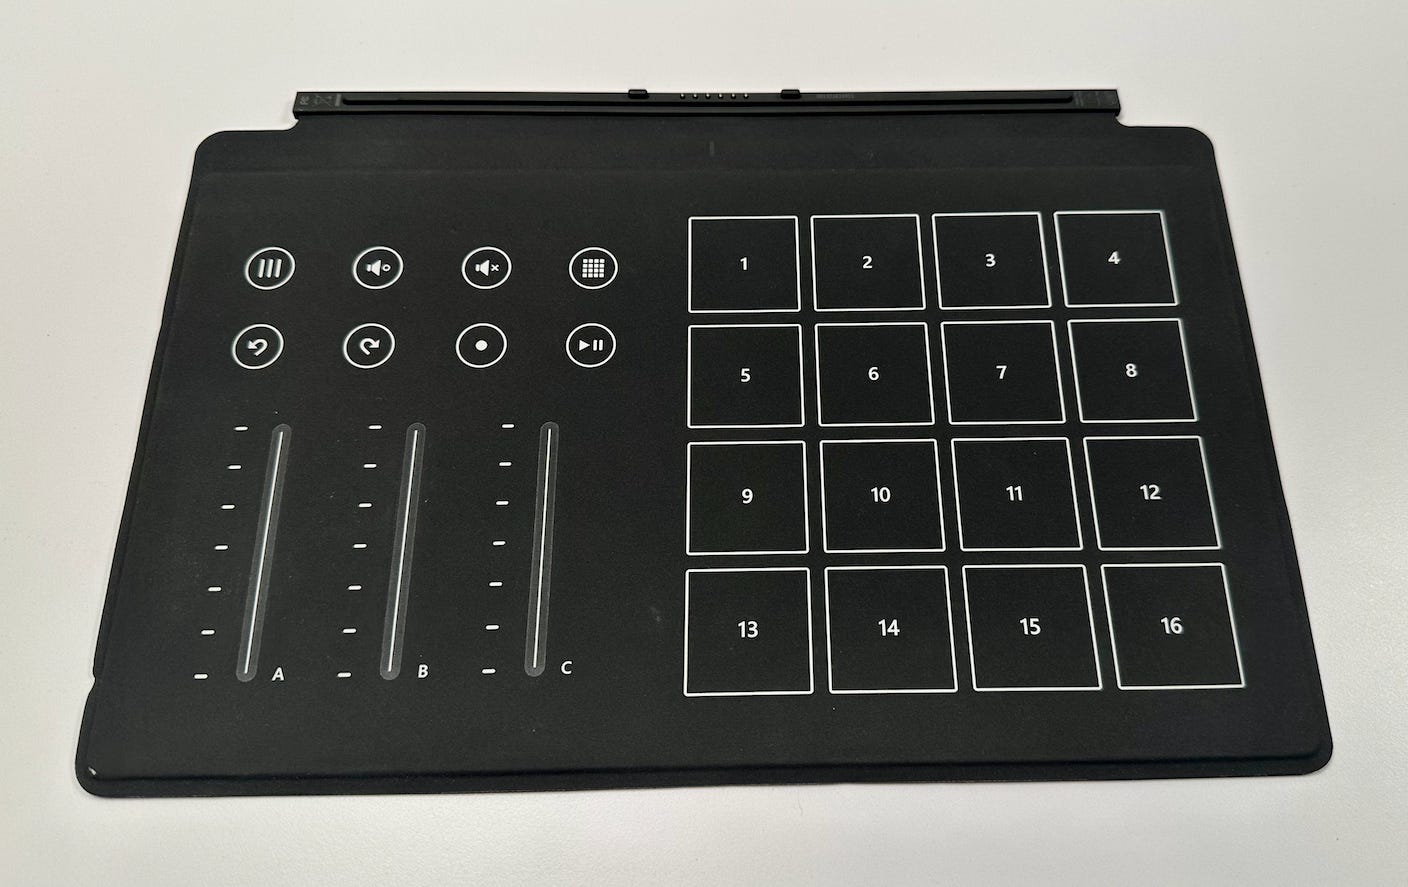 A touch cover with keys printed for being a drum machine rather than typing letters. There are giant numbers, volume and tracking controls and sliders.